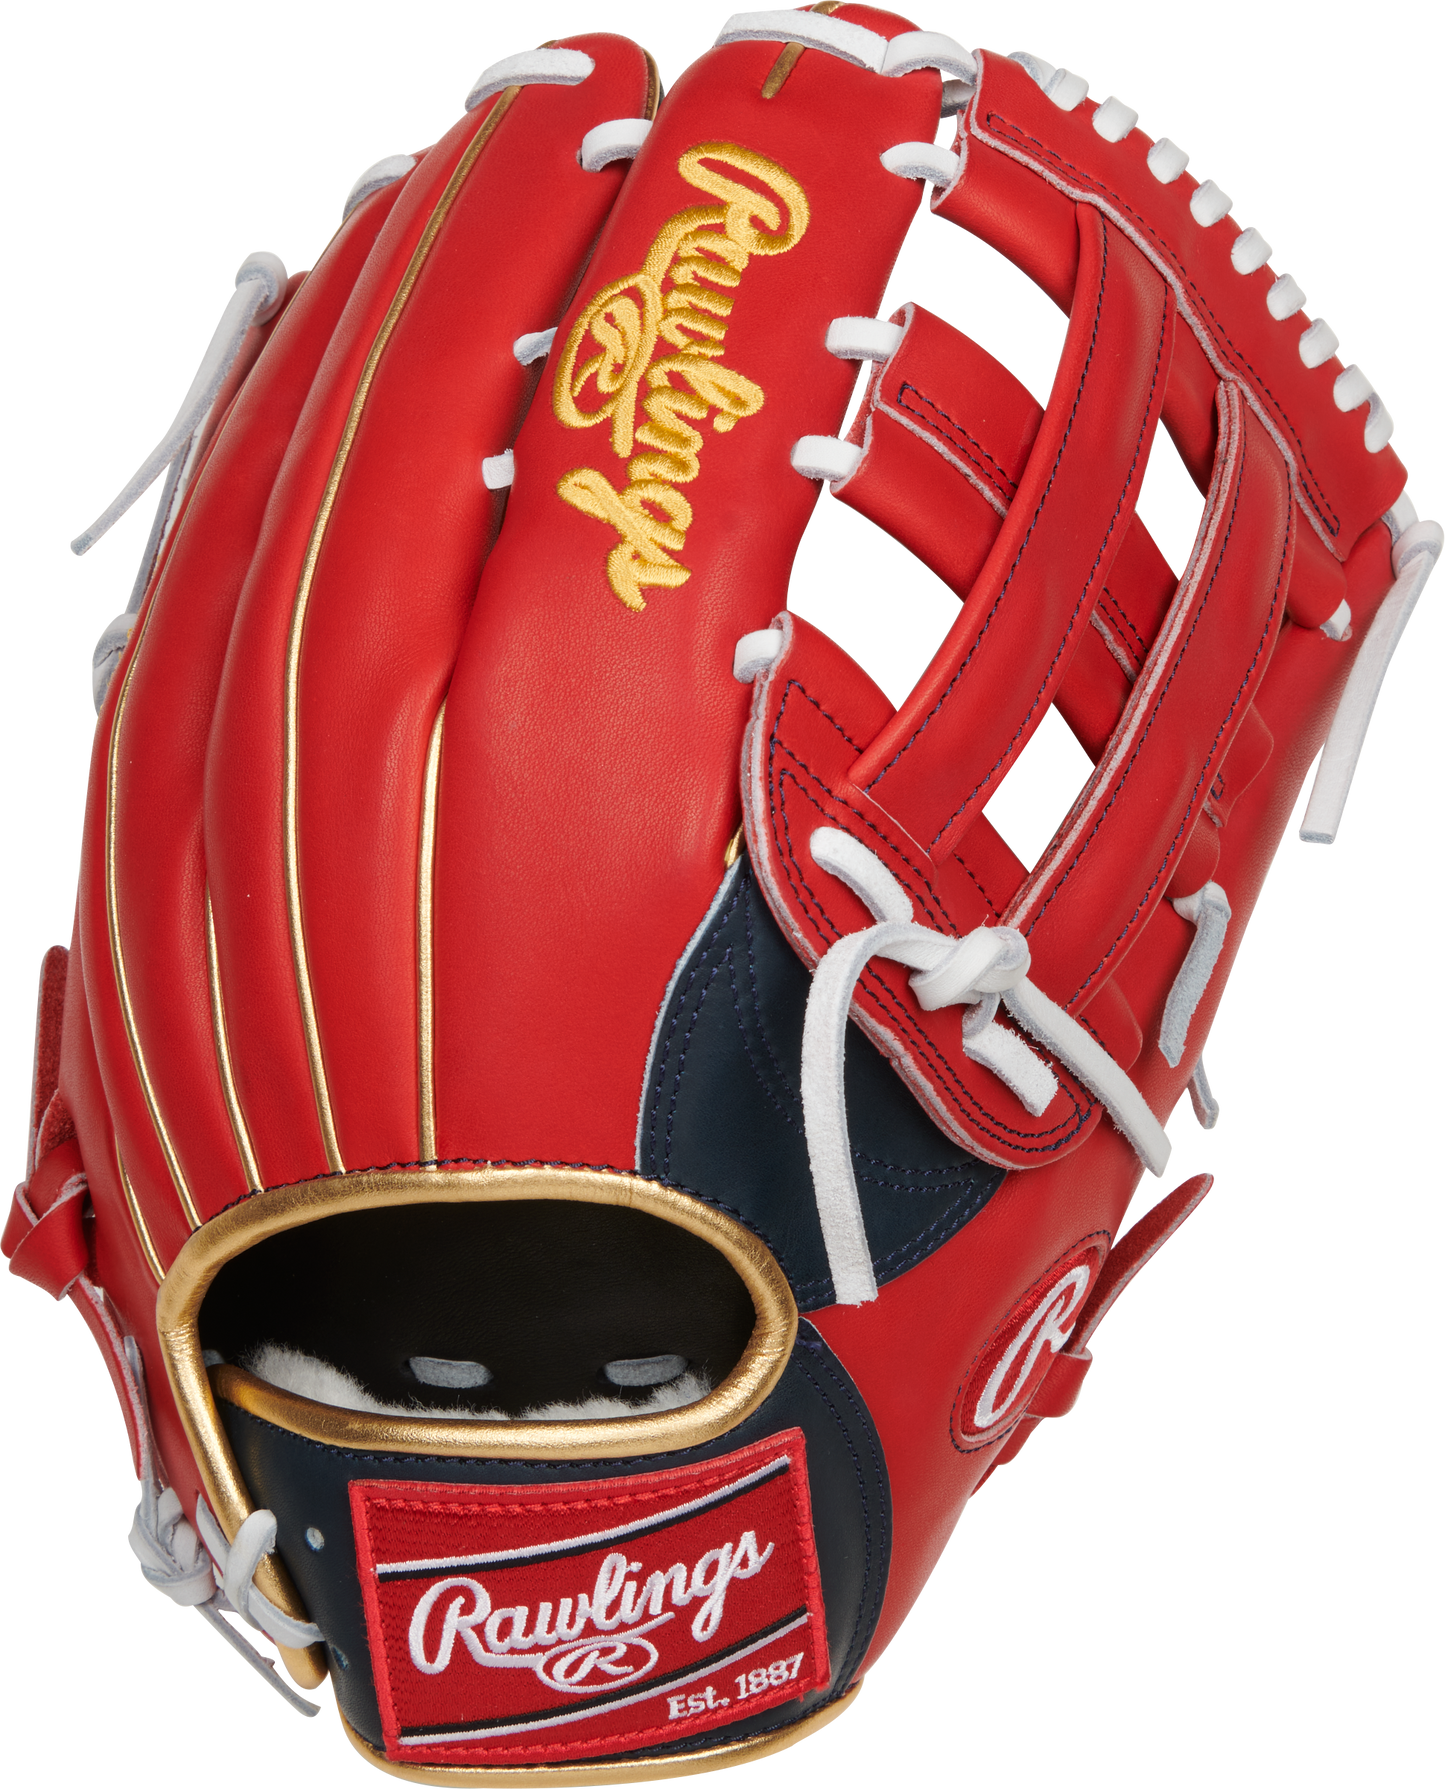 2022 RONALD ACUÑA JR. PRO PREFERRED OUTFIELD GLOVE - (SEE PRODUCT DESCRIPTIONS FOR DELIVERY DETAILS) Bat Club USA